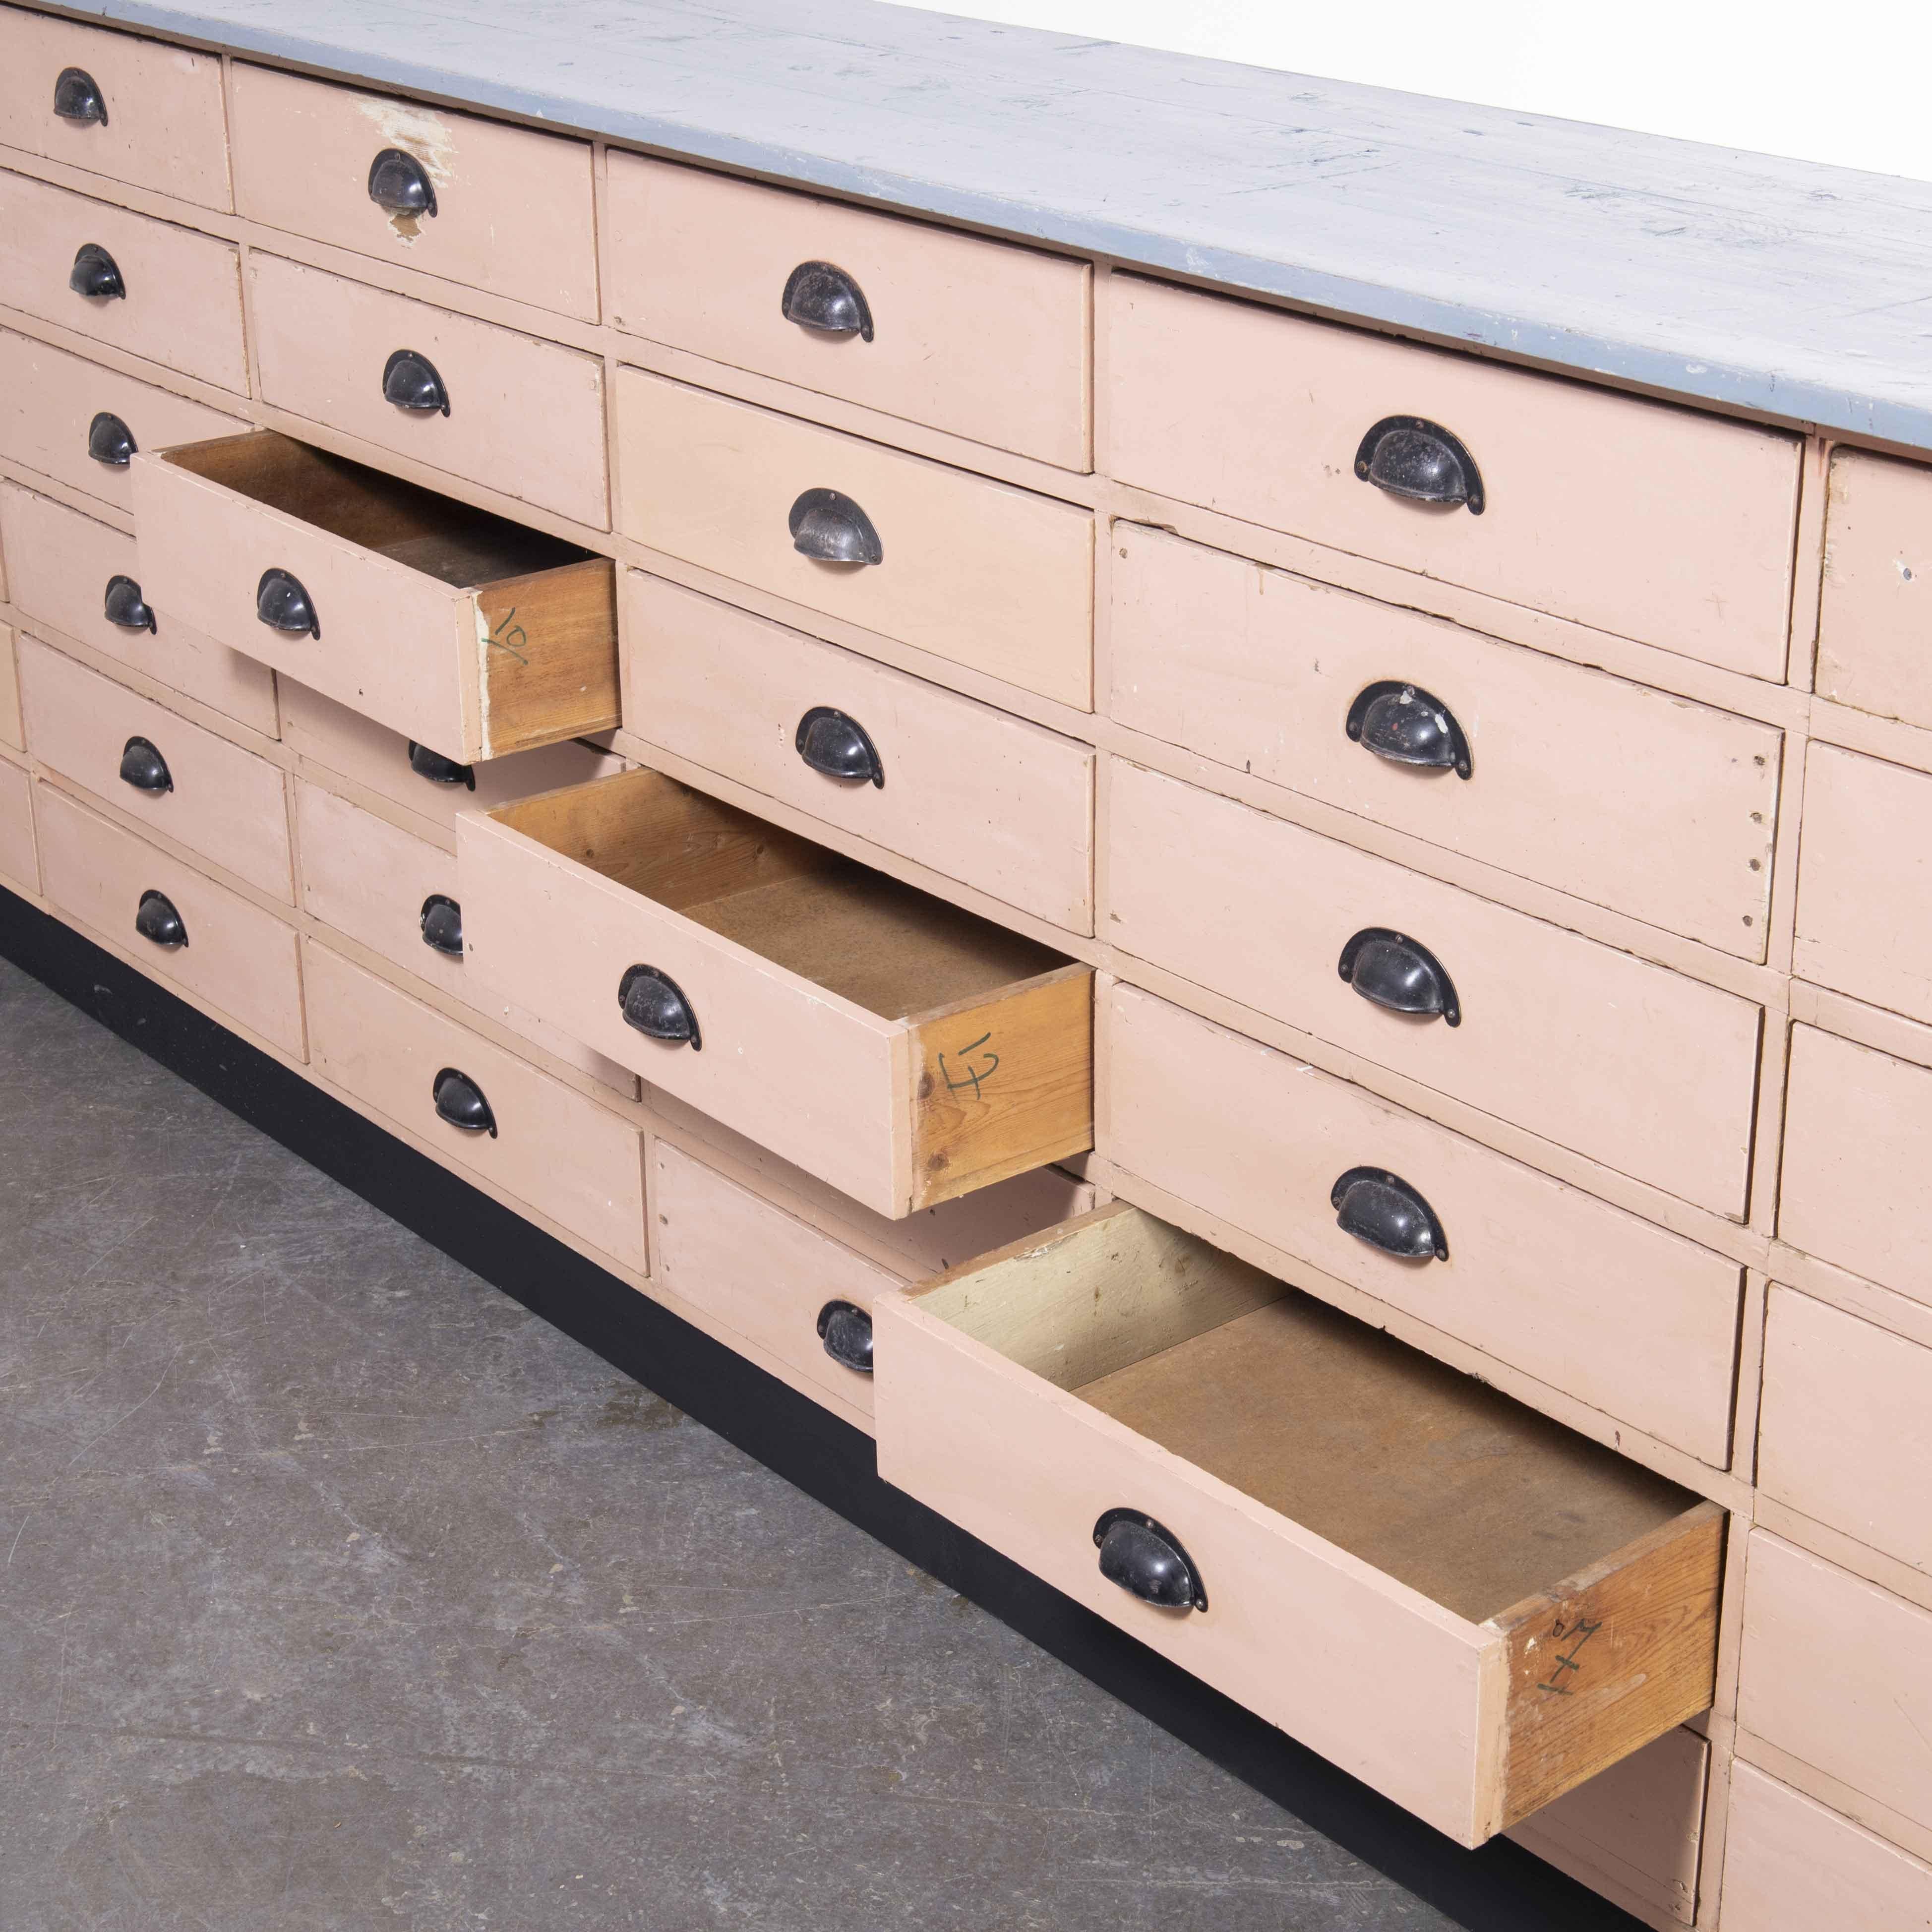 1950’s long French workshop bank of drawers – Thirty six drawers

1950’s long French art college bank of drawers – Thirty six drawers. Sourced from an art college in southern France, this is a stunning long well proportioned bank of drawers in the